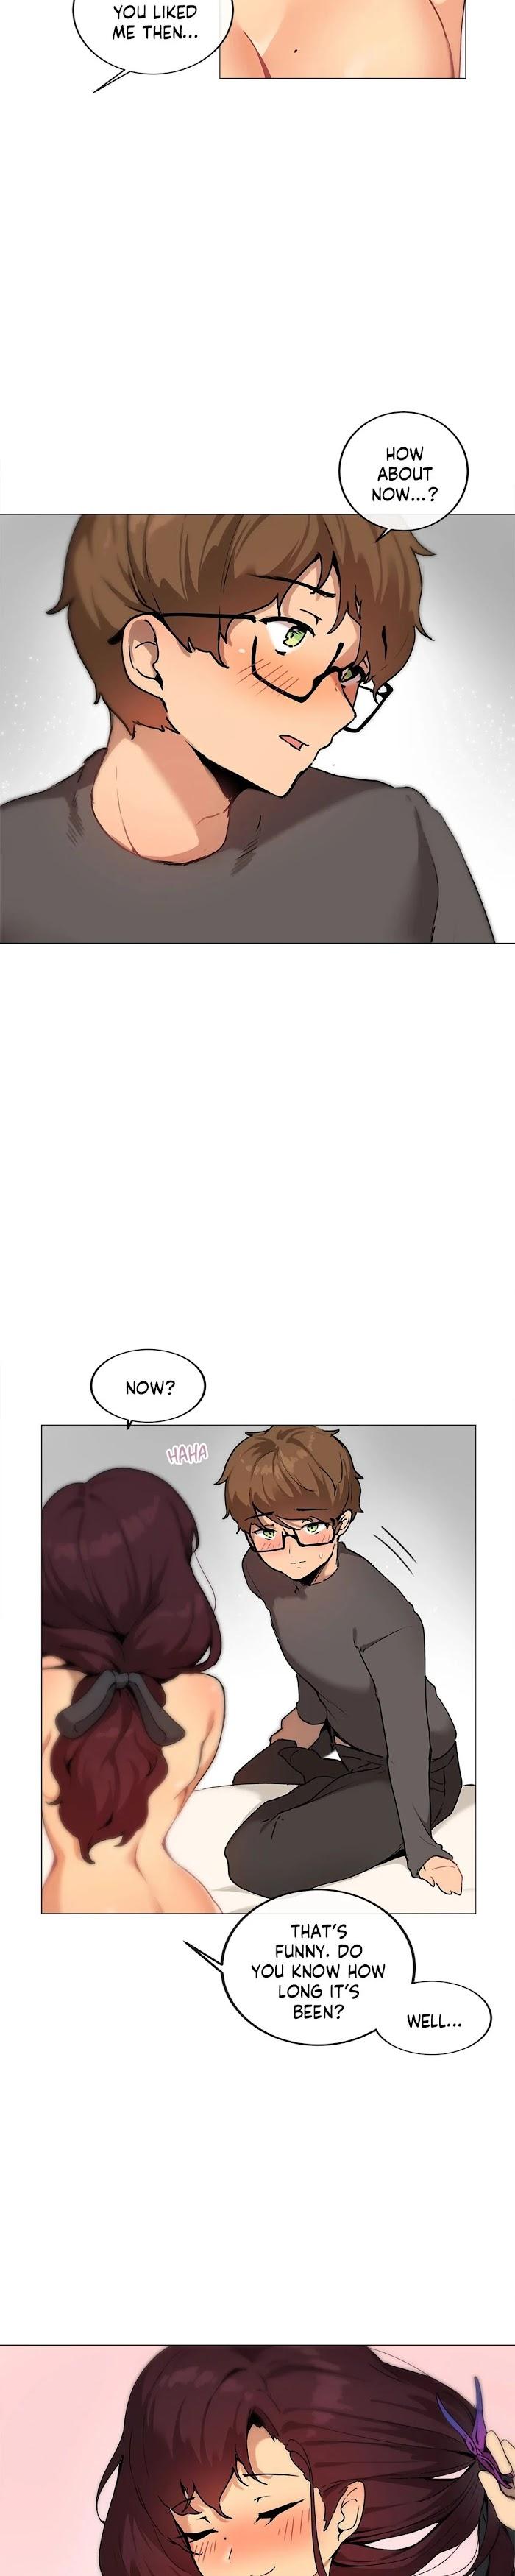 [Dumangoon, 130F] Sexcape Room: Wipe Out Ch.9/9 [English] [Manhwa PDF] Completed 117